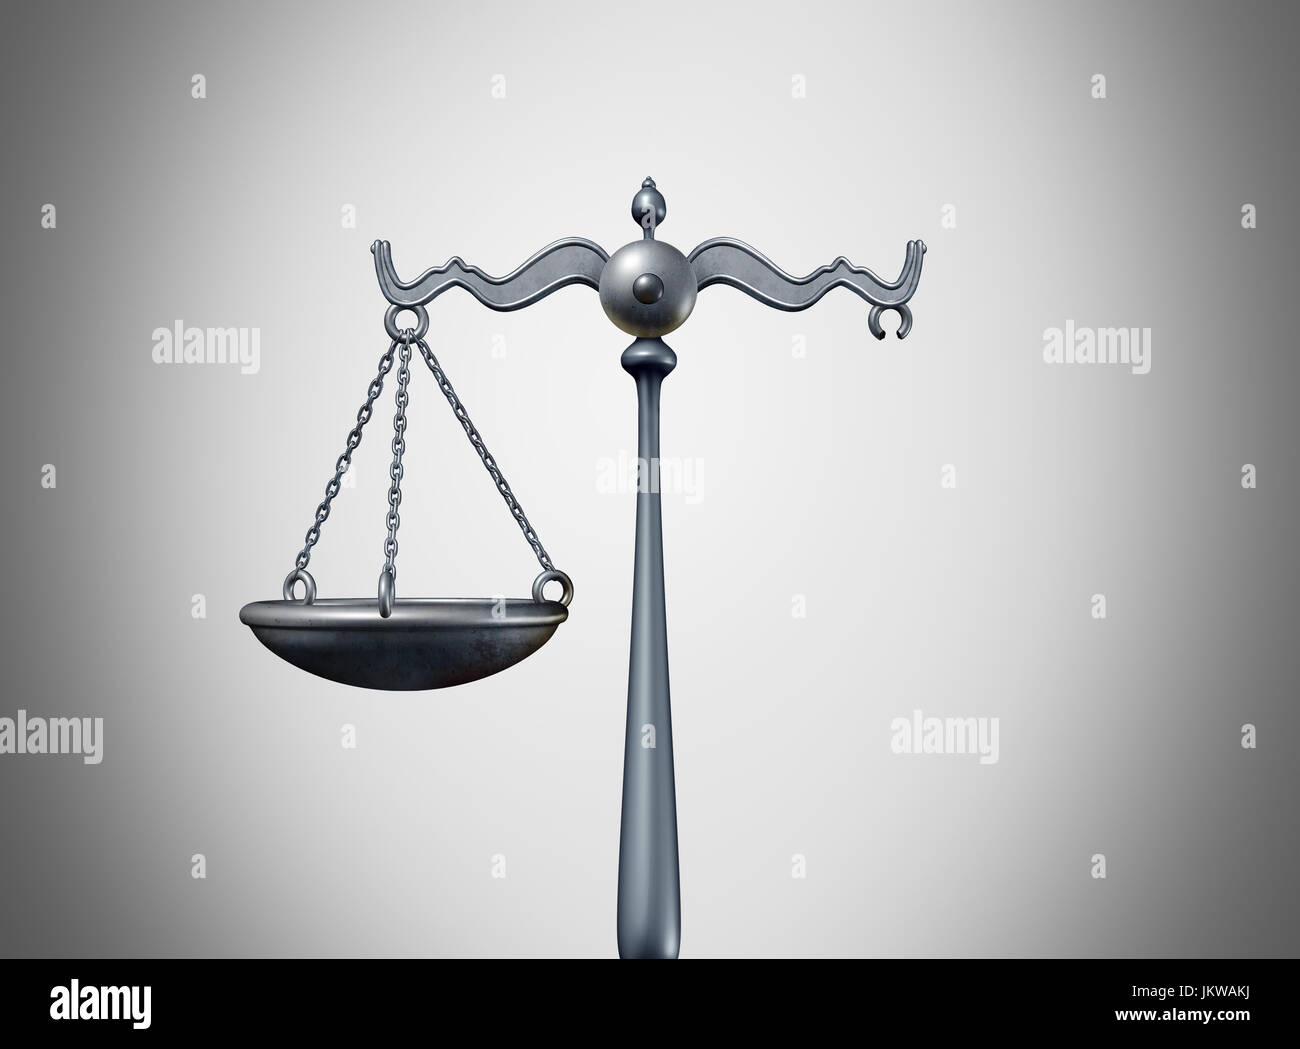 Broken law legal problem and justice system trouble concept as a scale of justice missing a piece as a metaphor for laws or regulation problems. Stock Photo